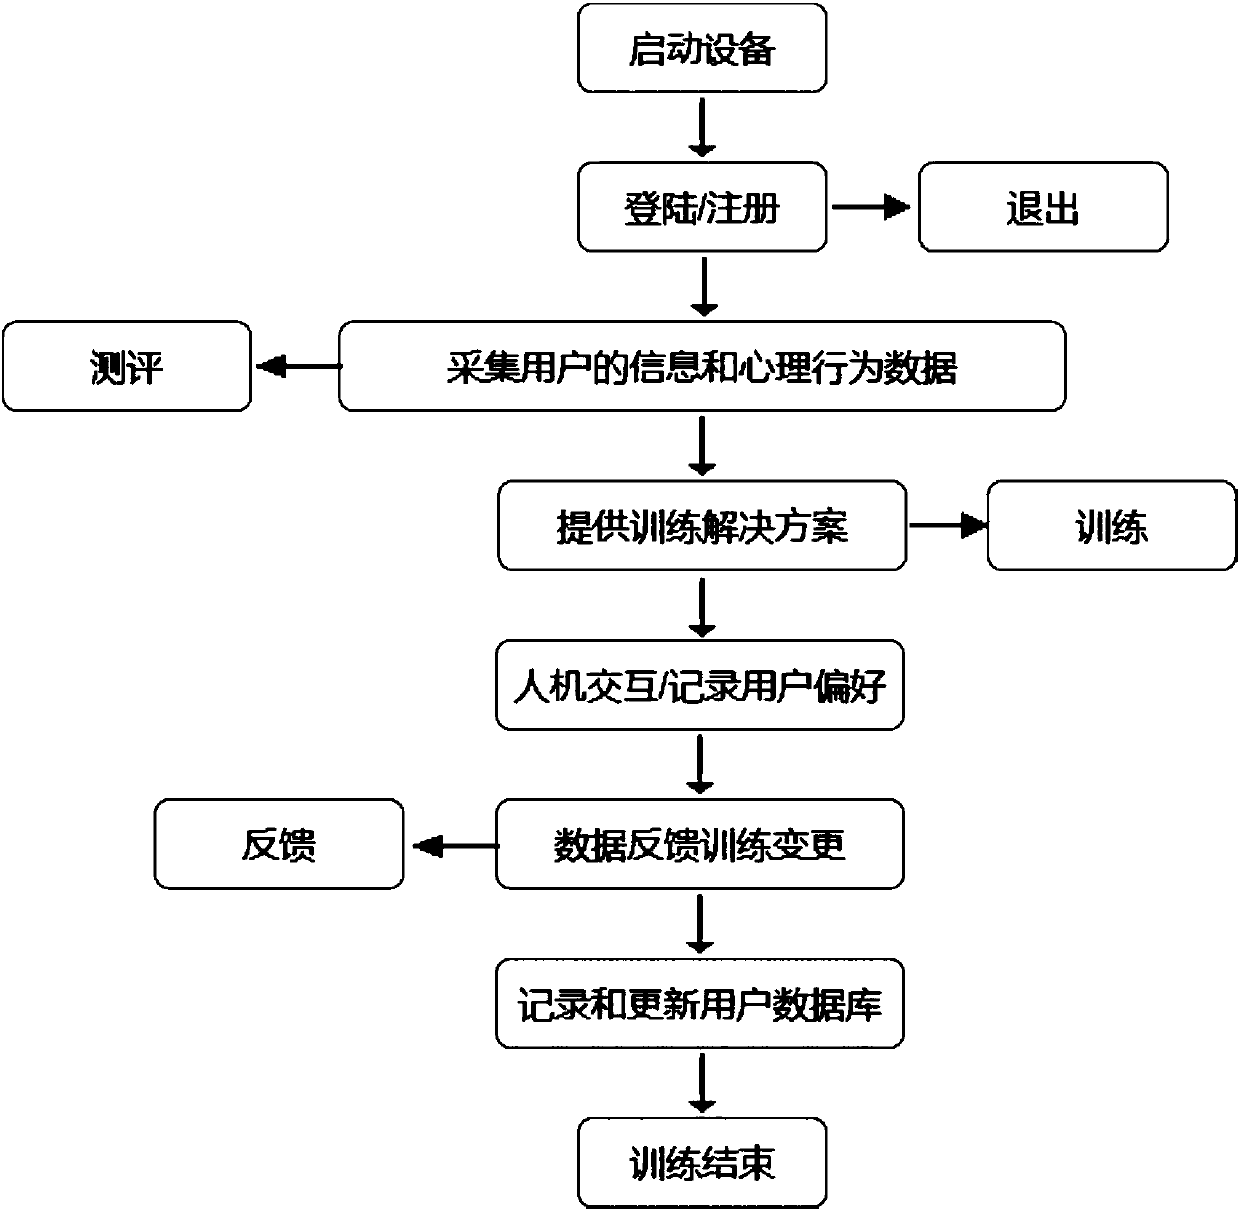 Cognitive-behavior-therapy-based psychological capital promotion training method and system